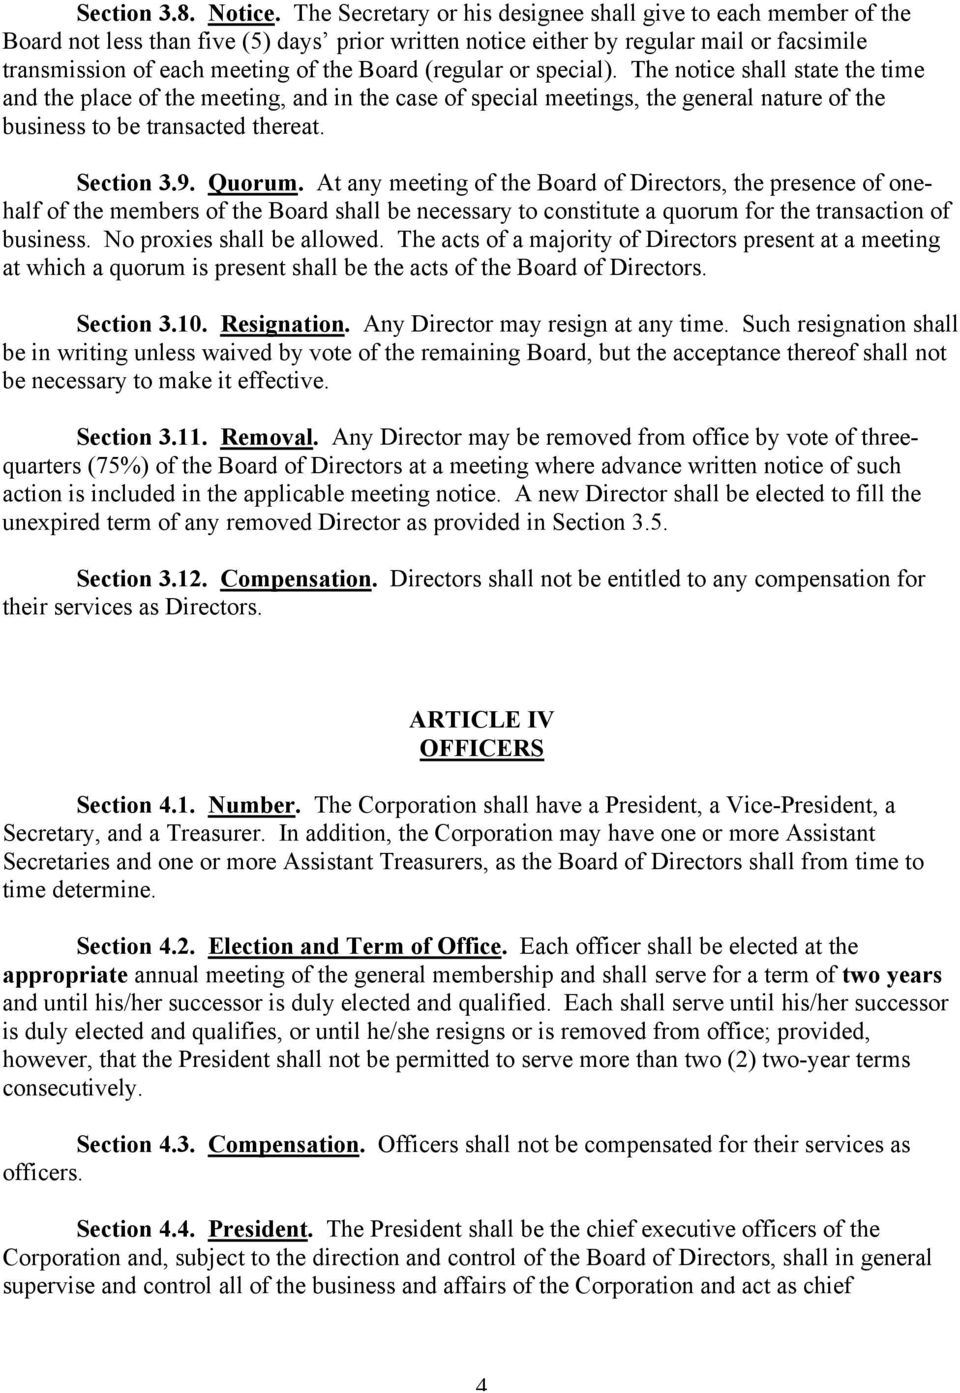 (regular or special). The notice shall state the time and the place of the meeting, and in the case of special meetings, the general nature of the business to be transacted thereat. Section 3.9.